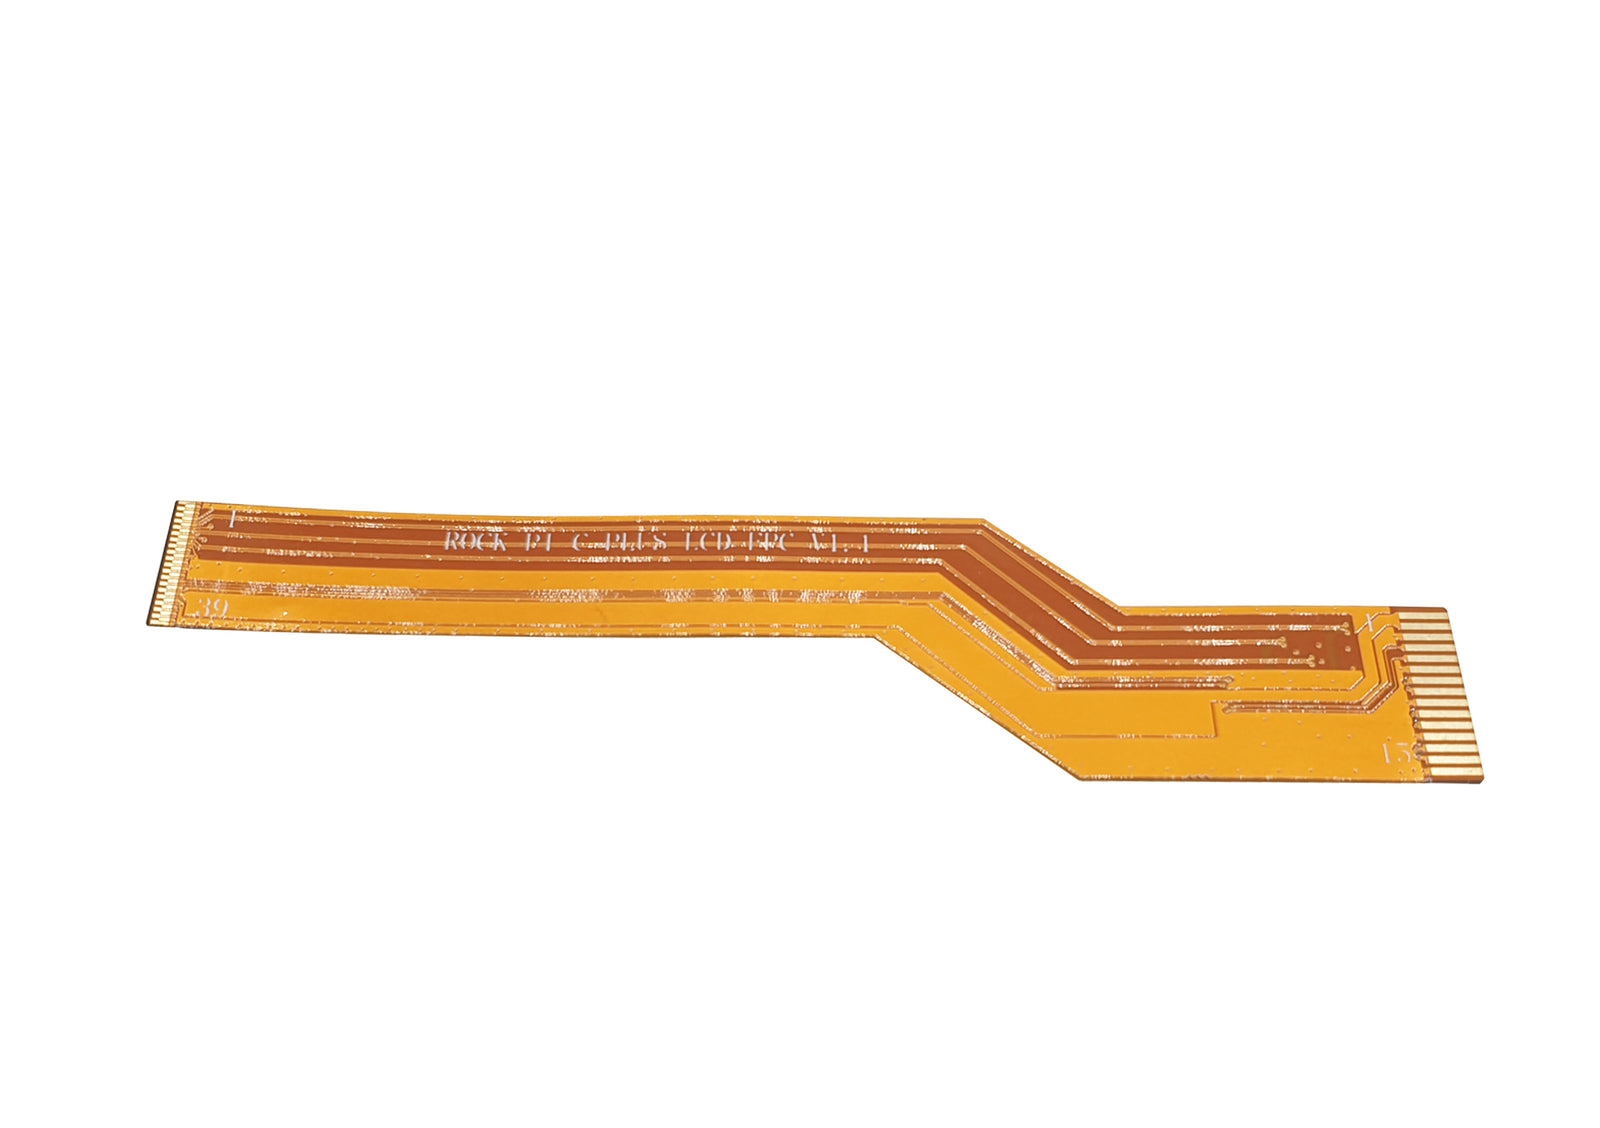 MIPI DSI adapter cable for Rock Pi 4C+, Radxa Zero2 or ROCK 5B boards